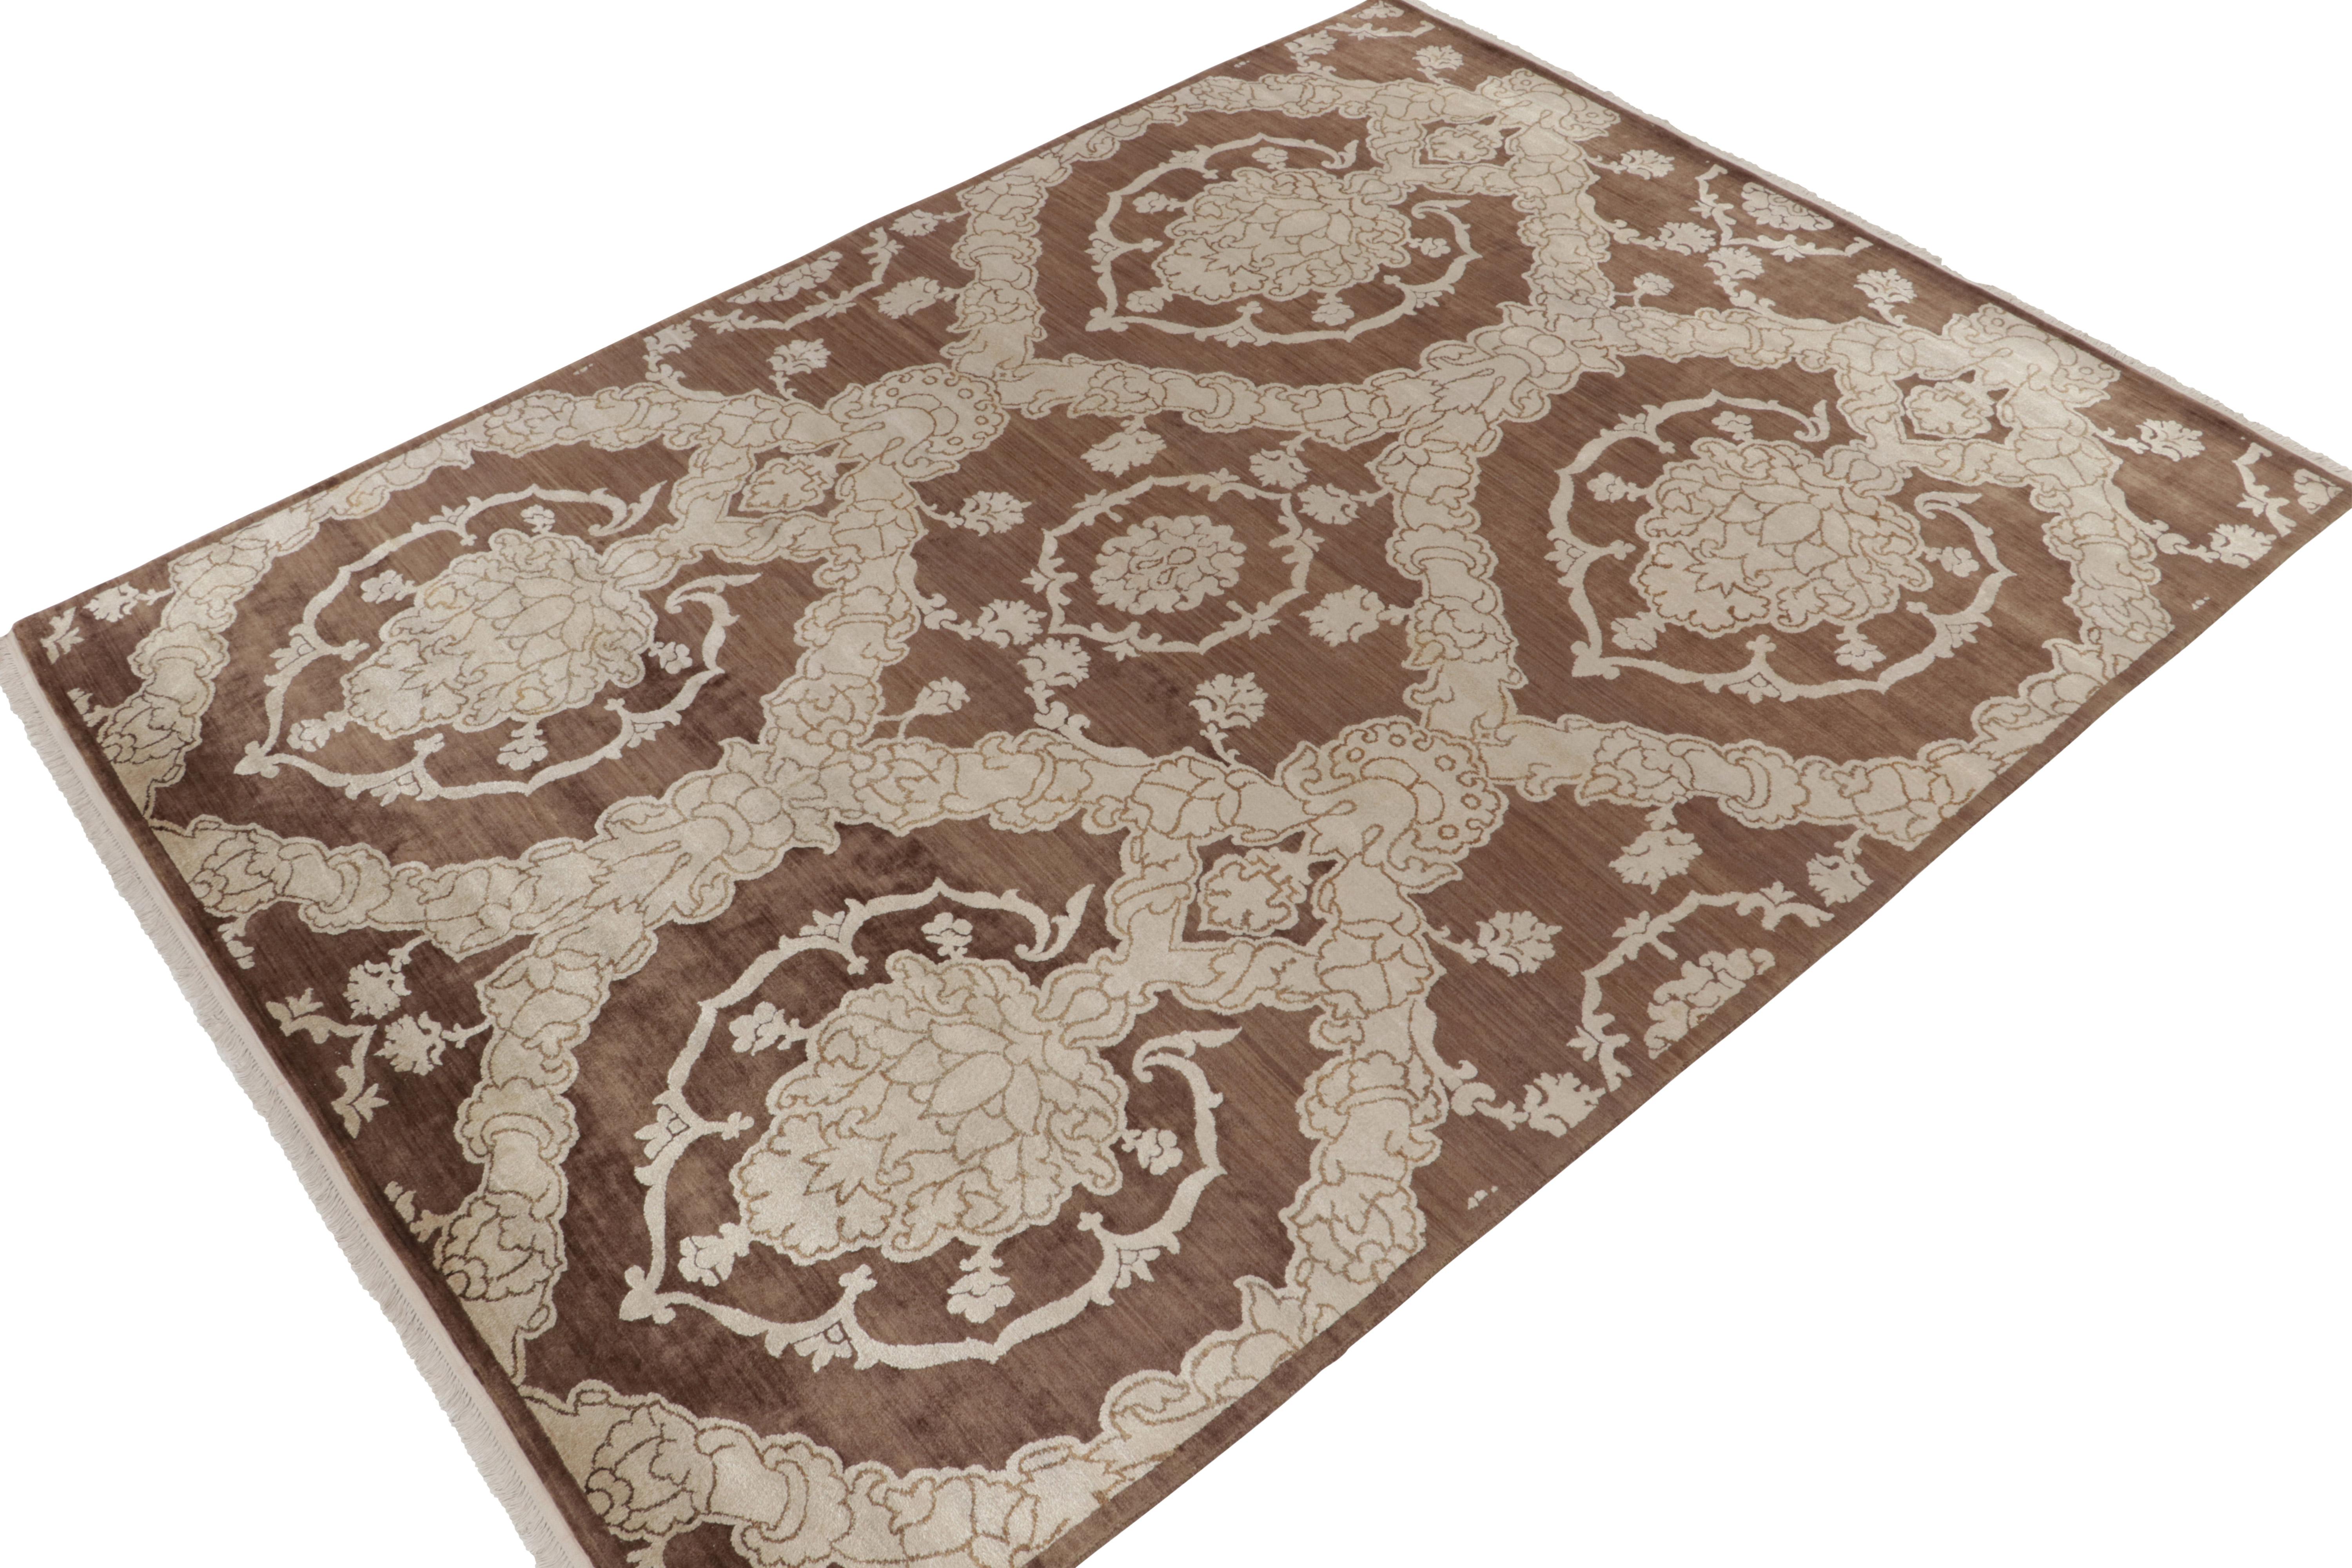 Hand-knotted in luxurious silk, this 9x12 contemporary rug from our Modern Classics collection draws on a delicious European sensibility. 

On the design: A gracious scale hosts a play of medallions and floral trellis patterns connoting inspirations